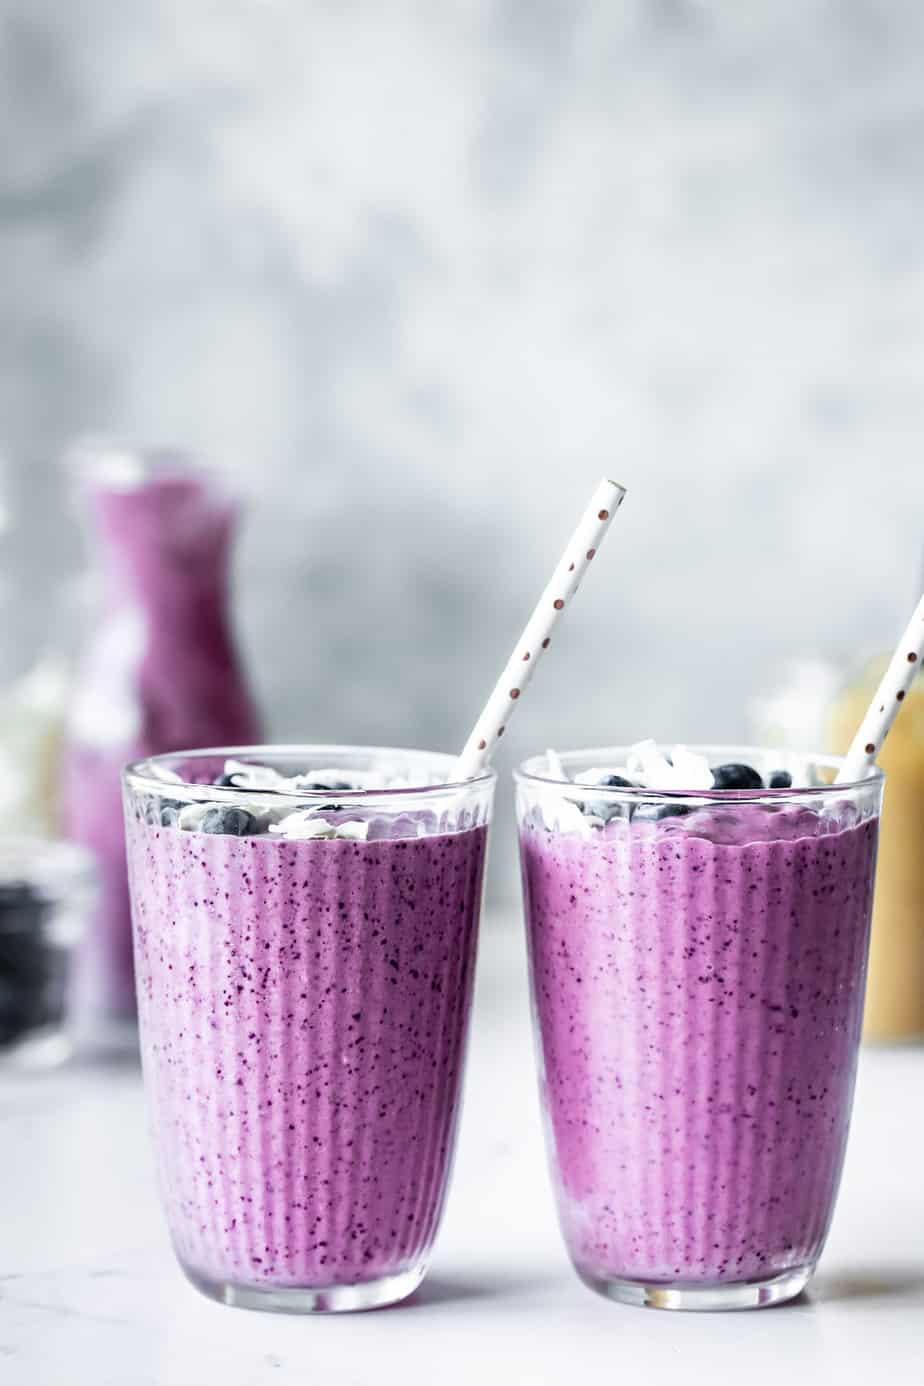 Two glasses of blueberry pineapple smoothies with white straws.